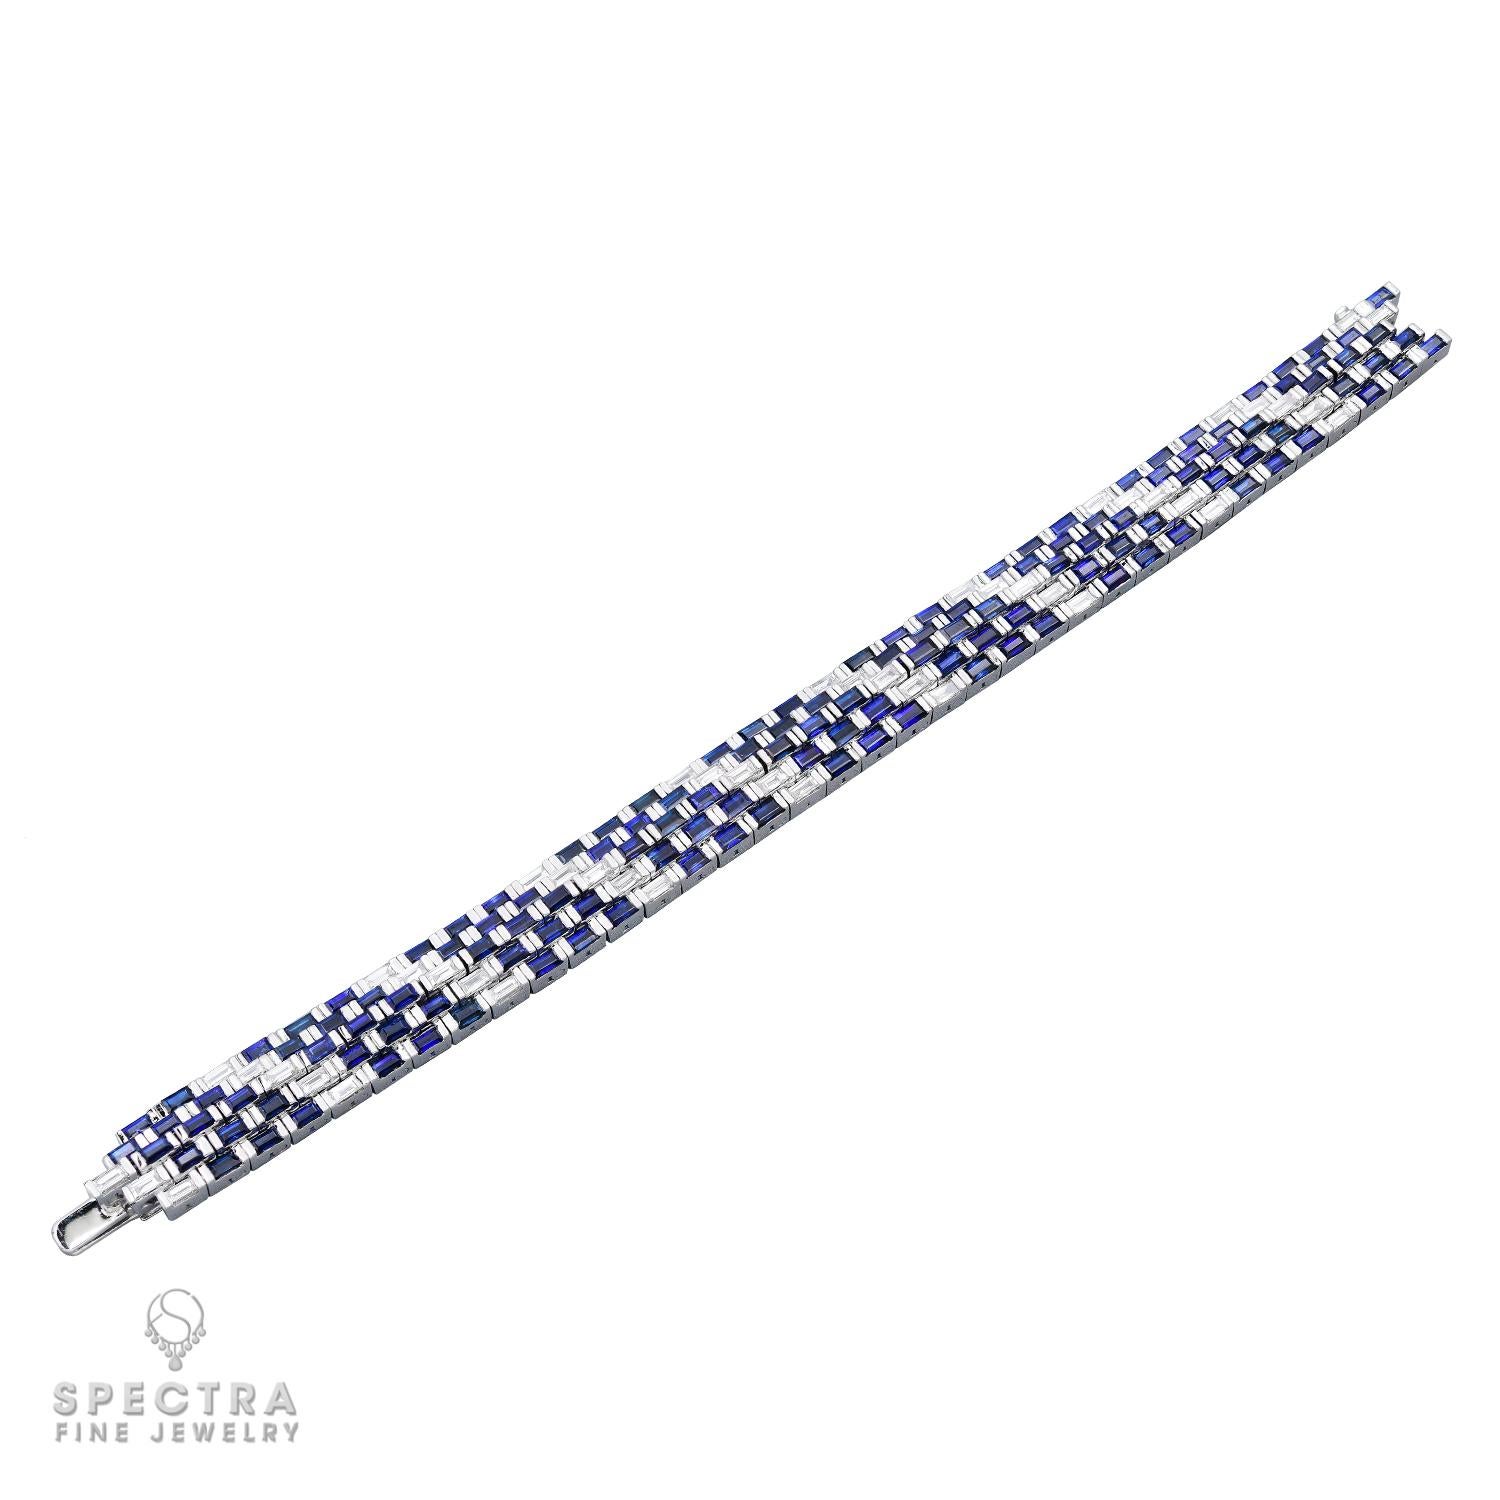 Around the time the Tennis Bracelet debuted into polite society, the classic tennis color combination was generally white and navy. The year was 1978. This was before players got clothing endorsements or even racquet endorsements for that matter,